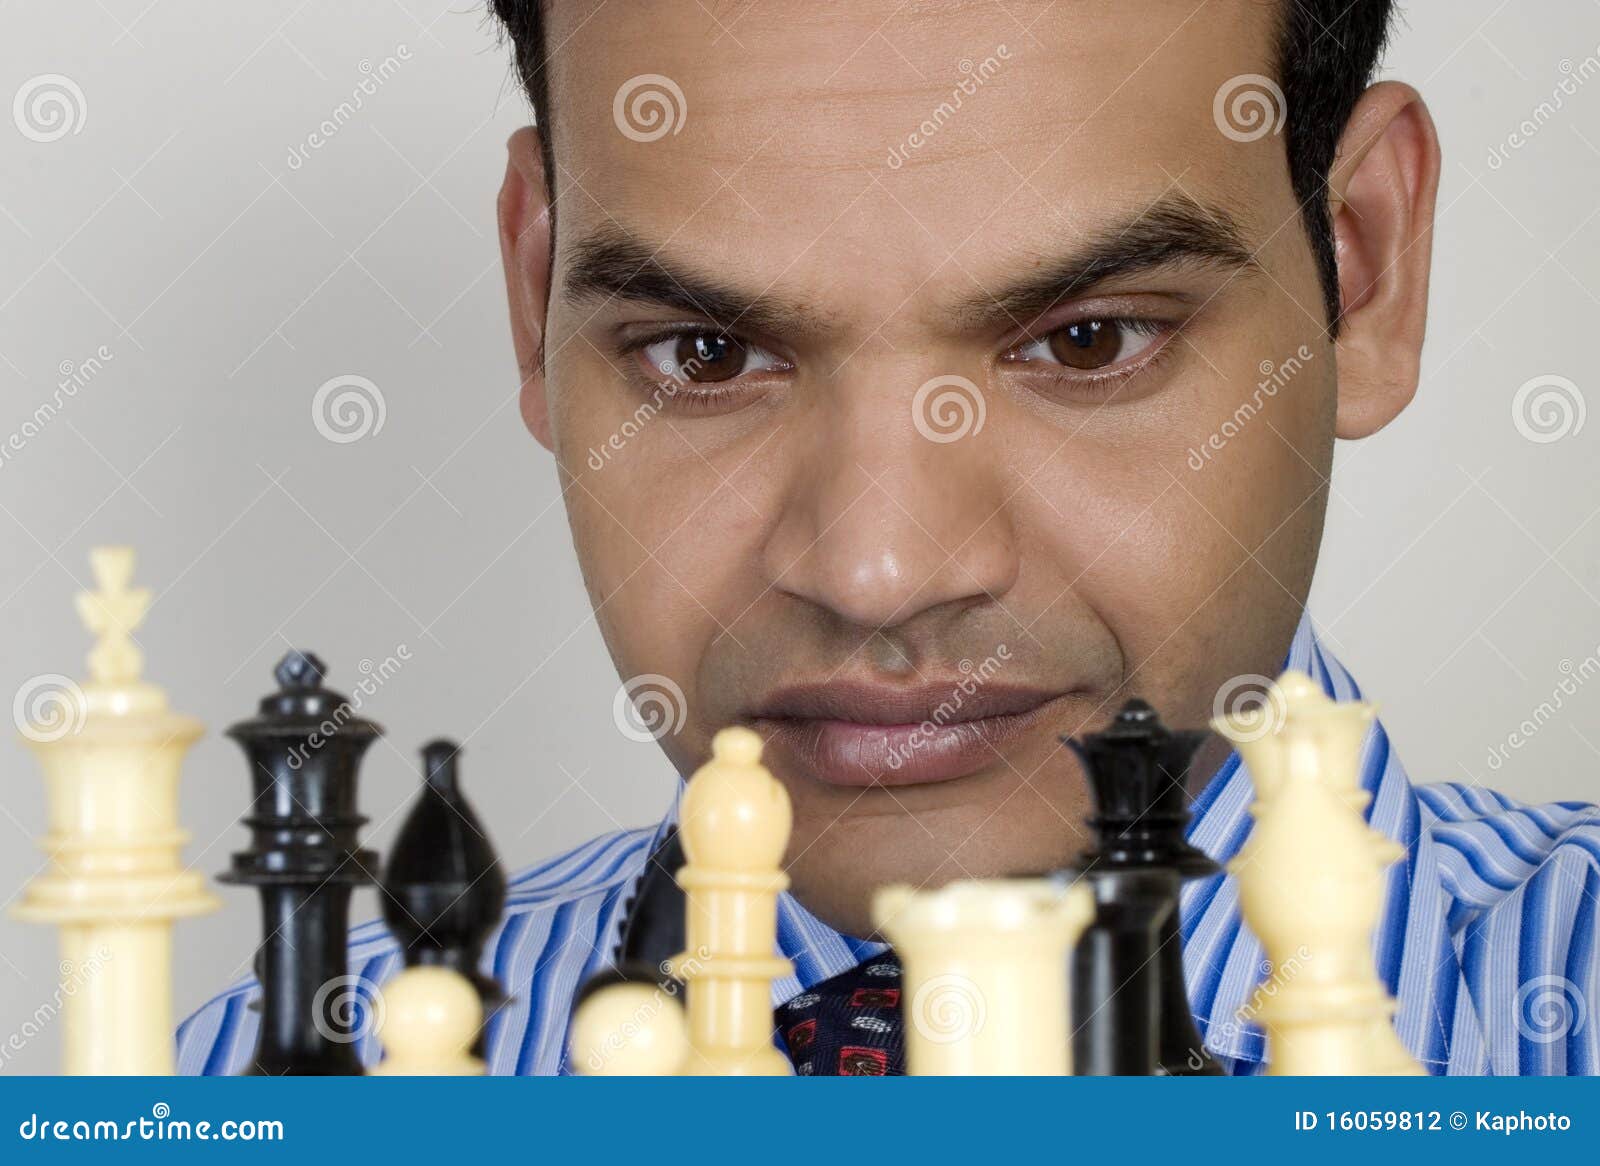 43+ Thousand Chess Player Royalty-Free Images, Stock Photos